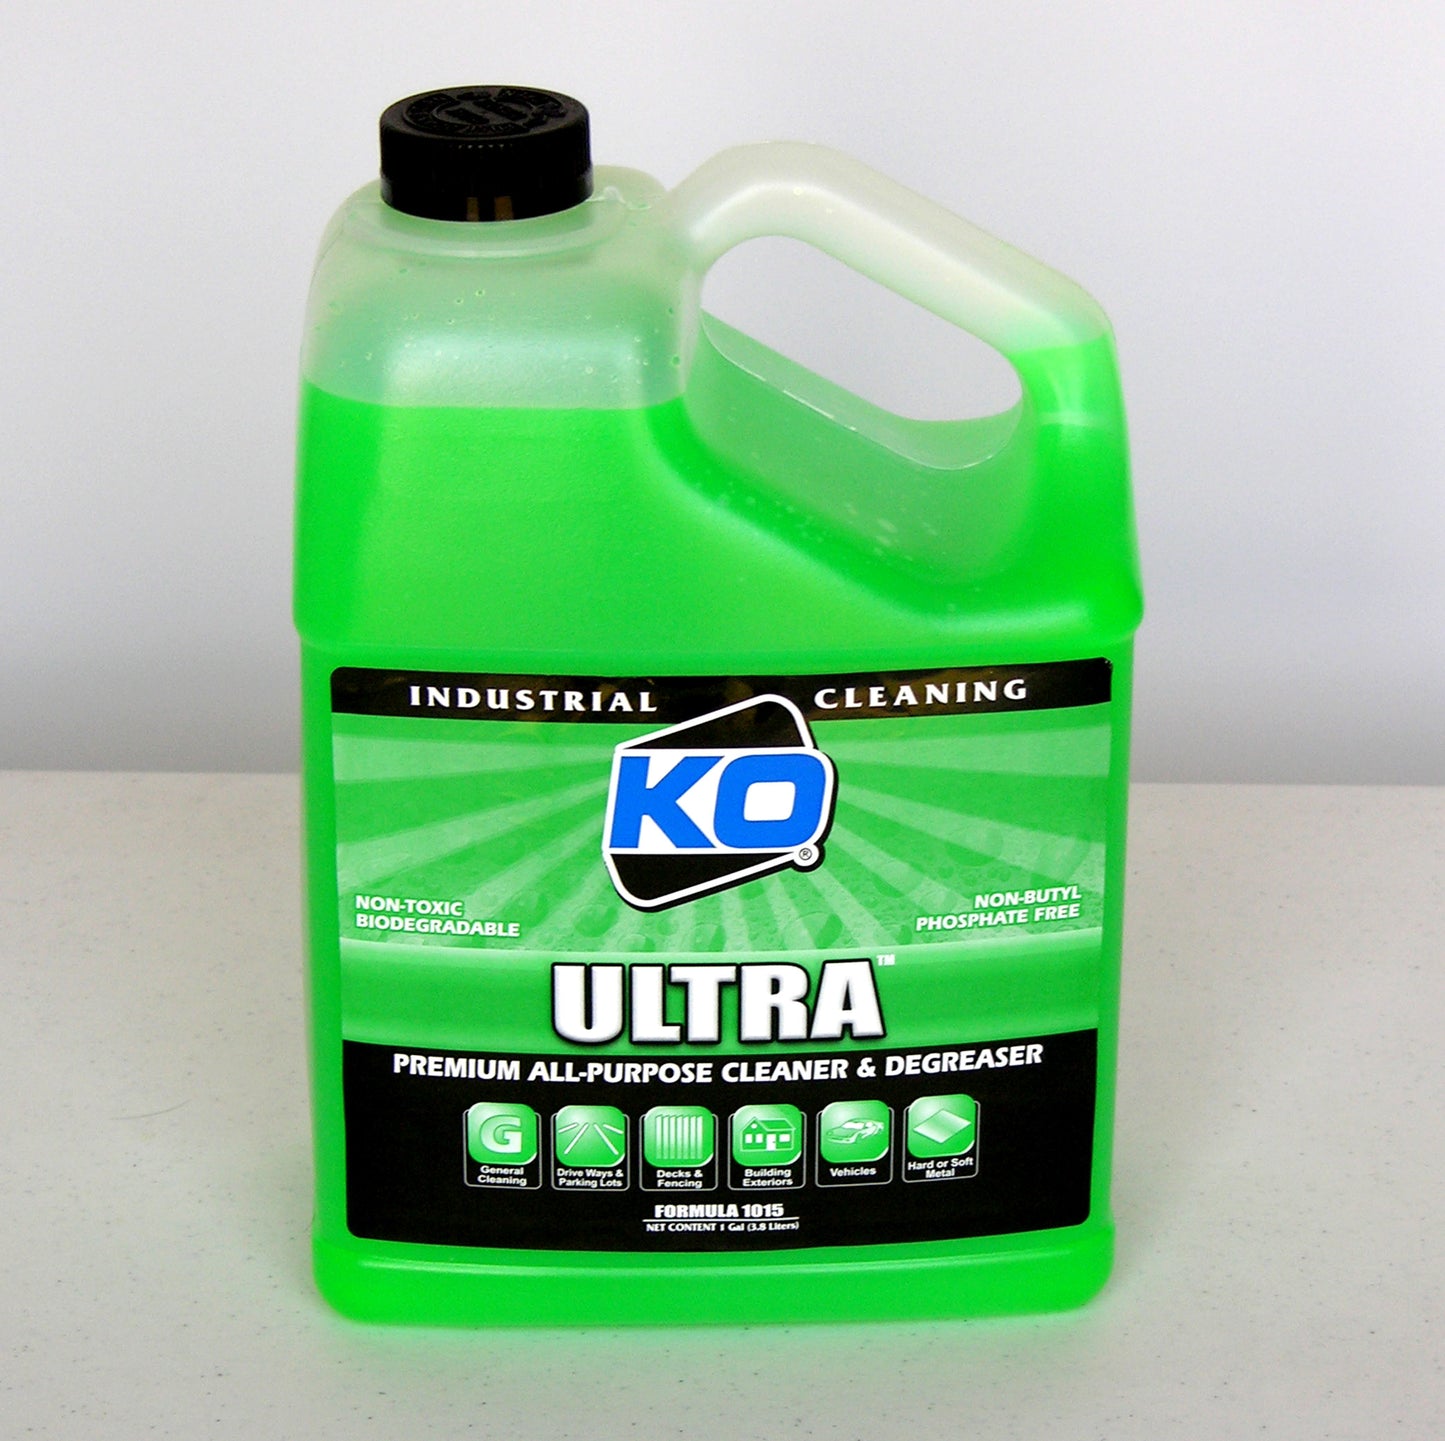 Ultra Multi-purpose Cleaner and Degreaser